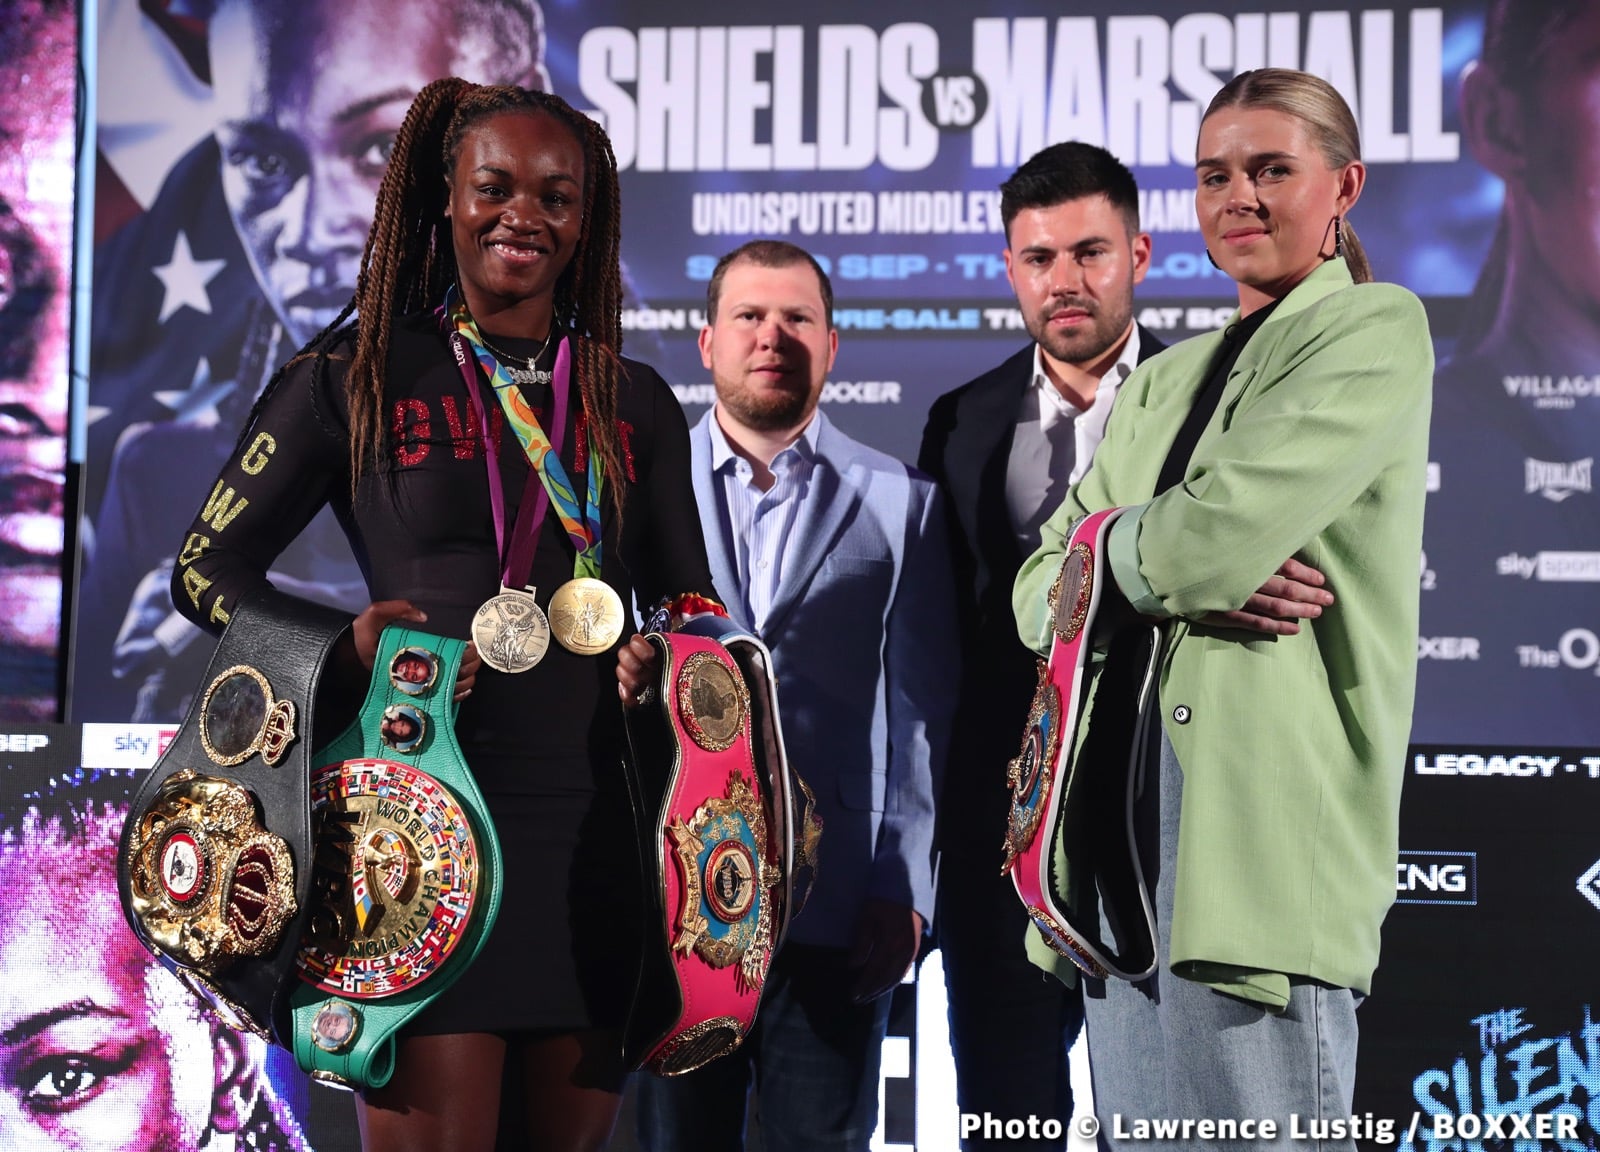 Image: Shields vs Marshall Official ESPN+ / Sky Sports Weigh In Results